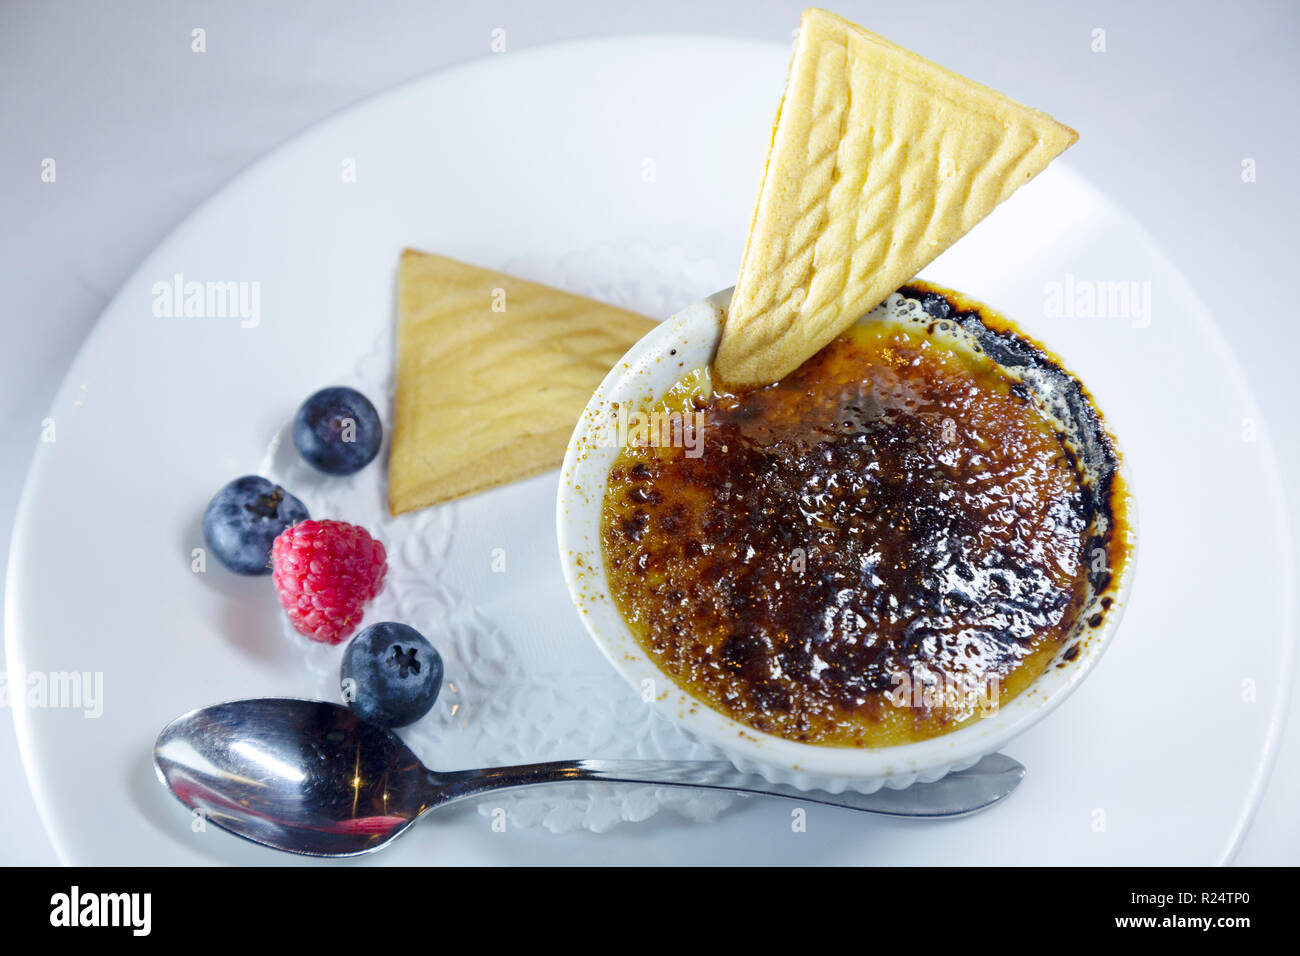 Creme Brulee served with wafers and seasonal fruit in Quebec, Canada. The dessert has a hard glaze. Stock Photo